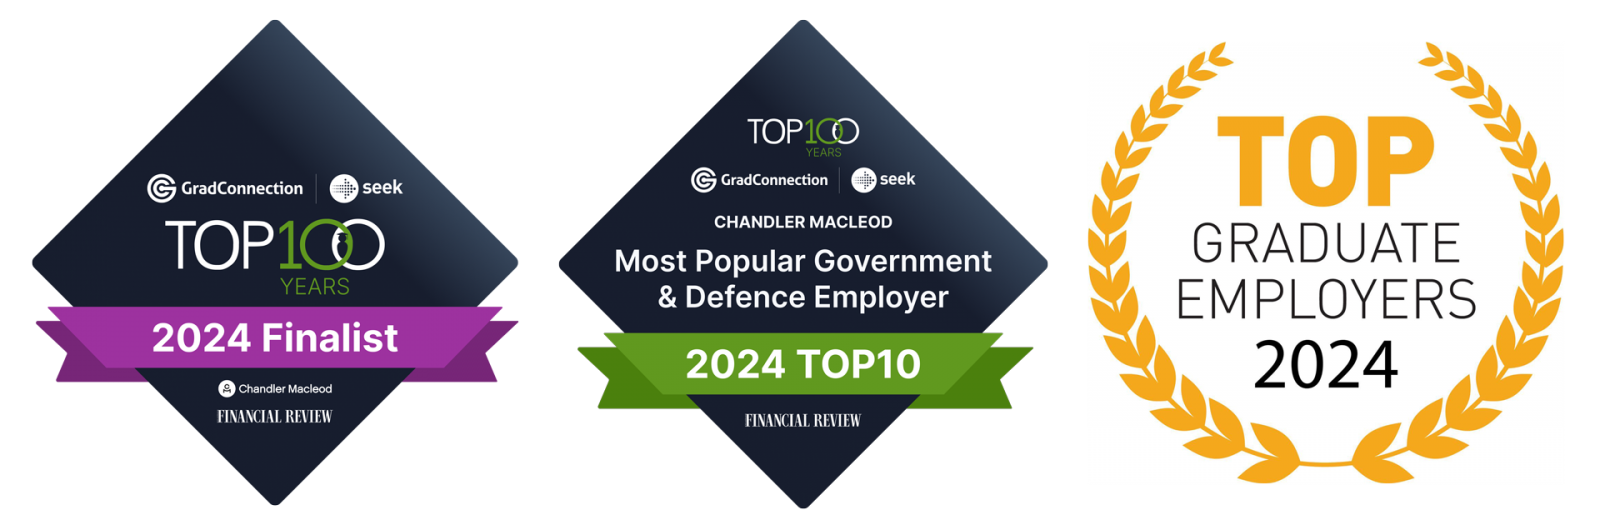 Top graduate employer awards: 2024 finalist, 2024 top 10 for Most Popular Government and Defence Employer, Top Graduate Employers 2024.